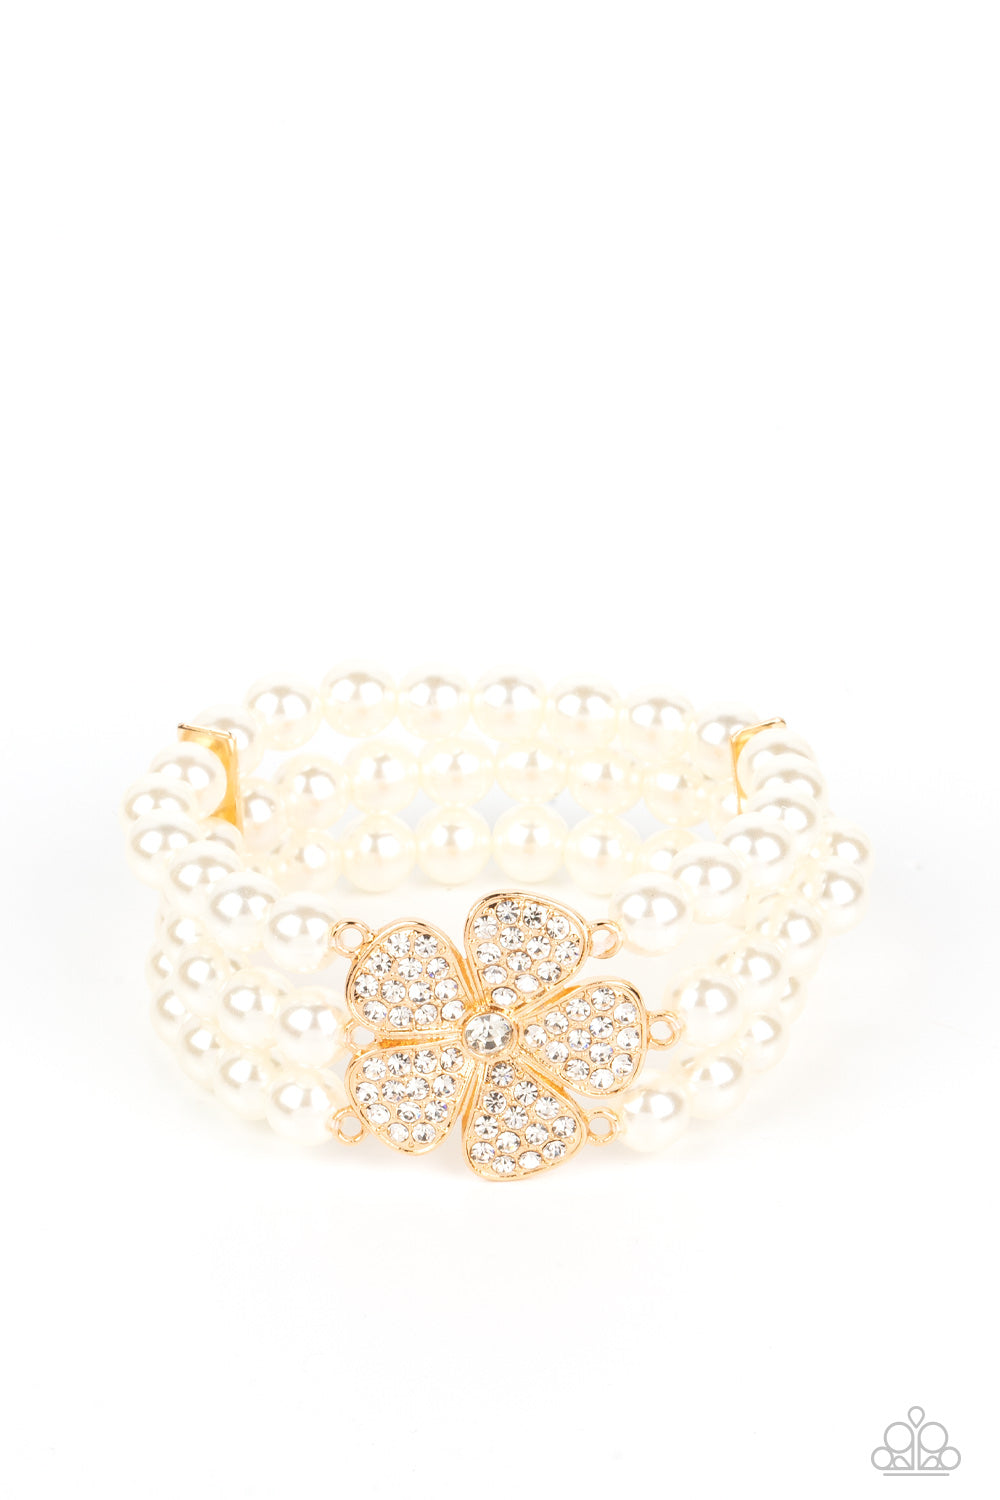 PAPARAZZI | Park Avenue Orchard - Gold | PEARL 3 STRAND STRETCHY BRACELET WITH FLOWER BLOOM ENCRUSTED